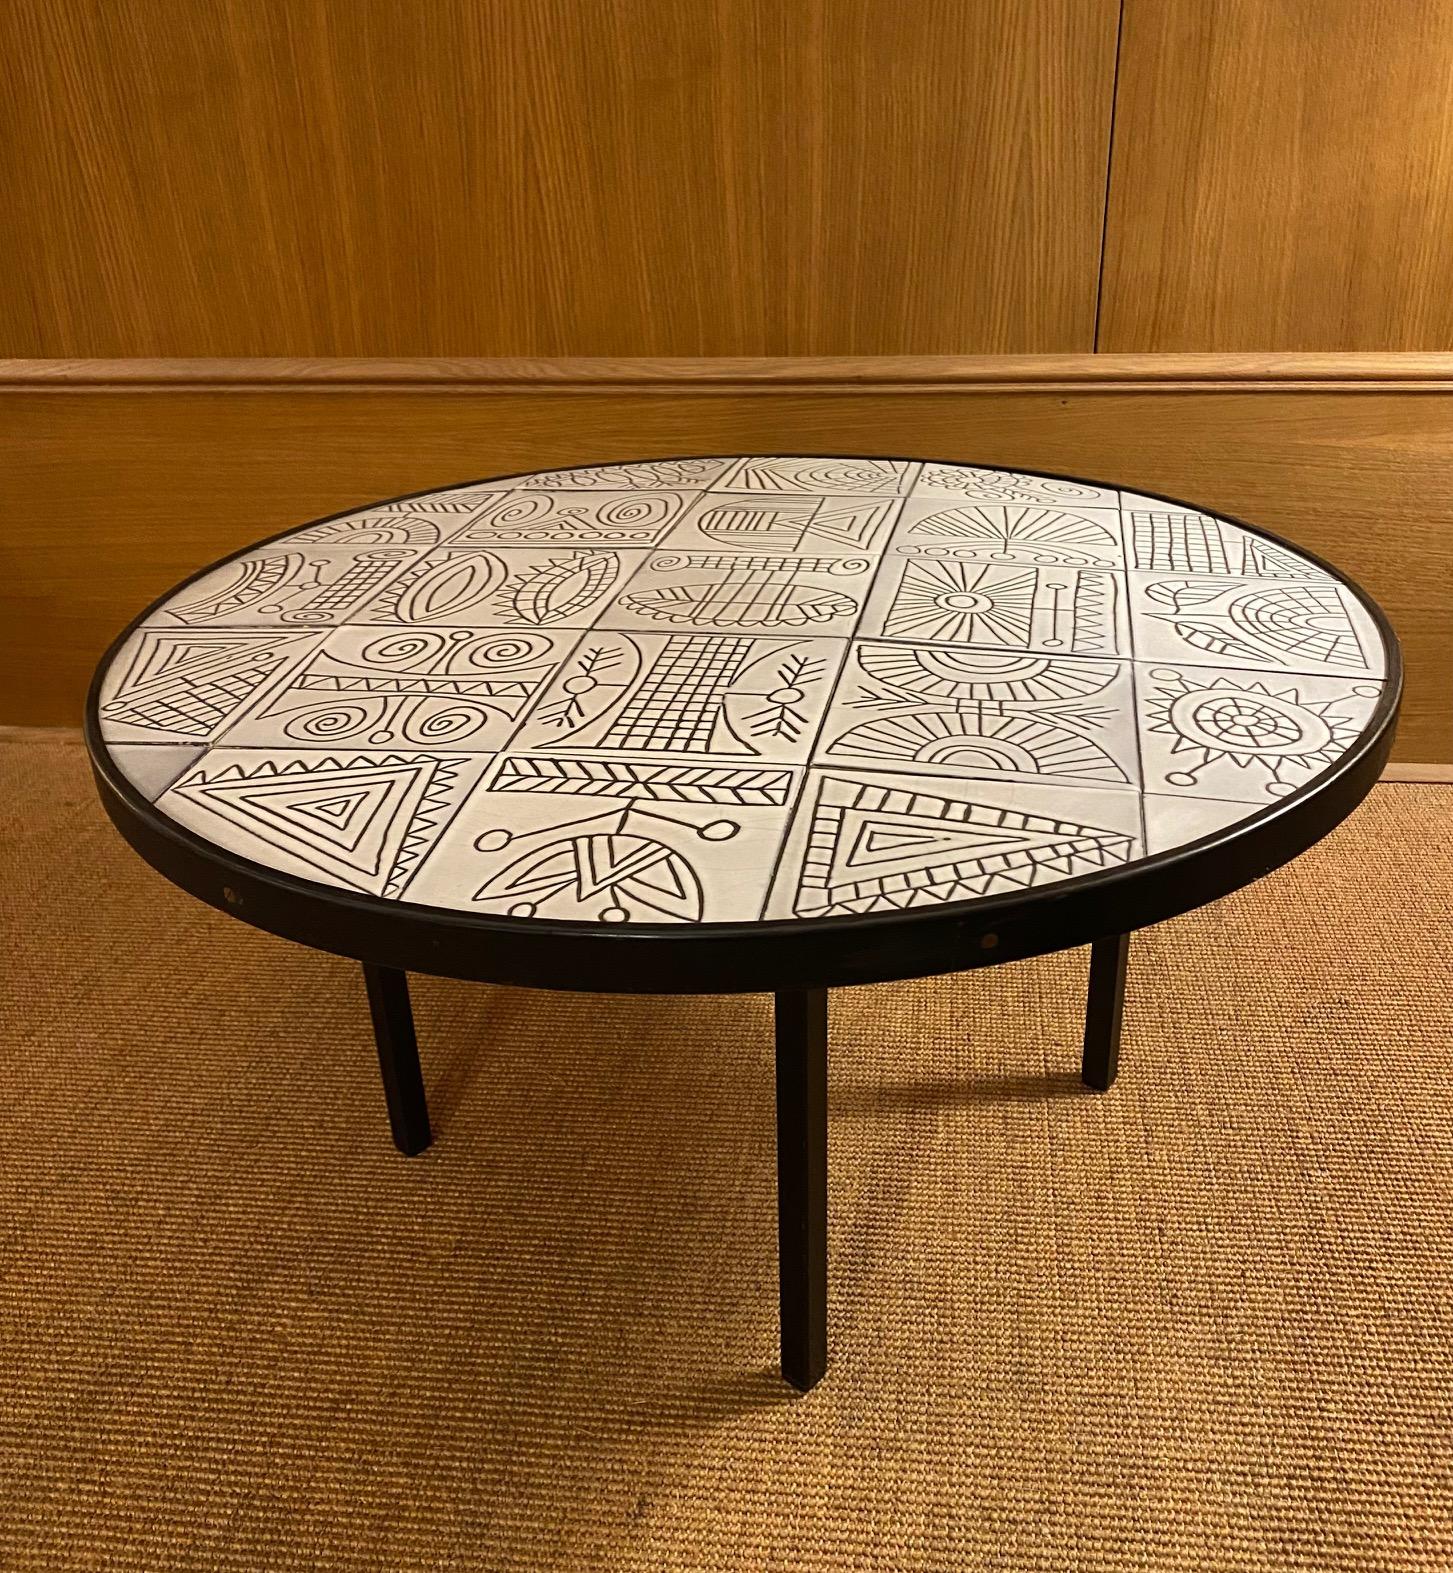 Ceramic coffee table by Roger Capron, France, 1960s
Similar patterns reproduced in the book 